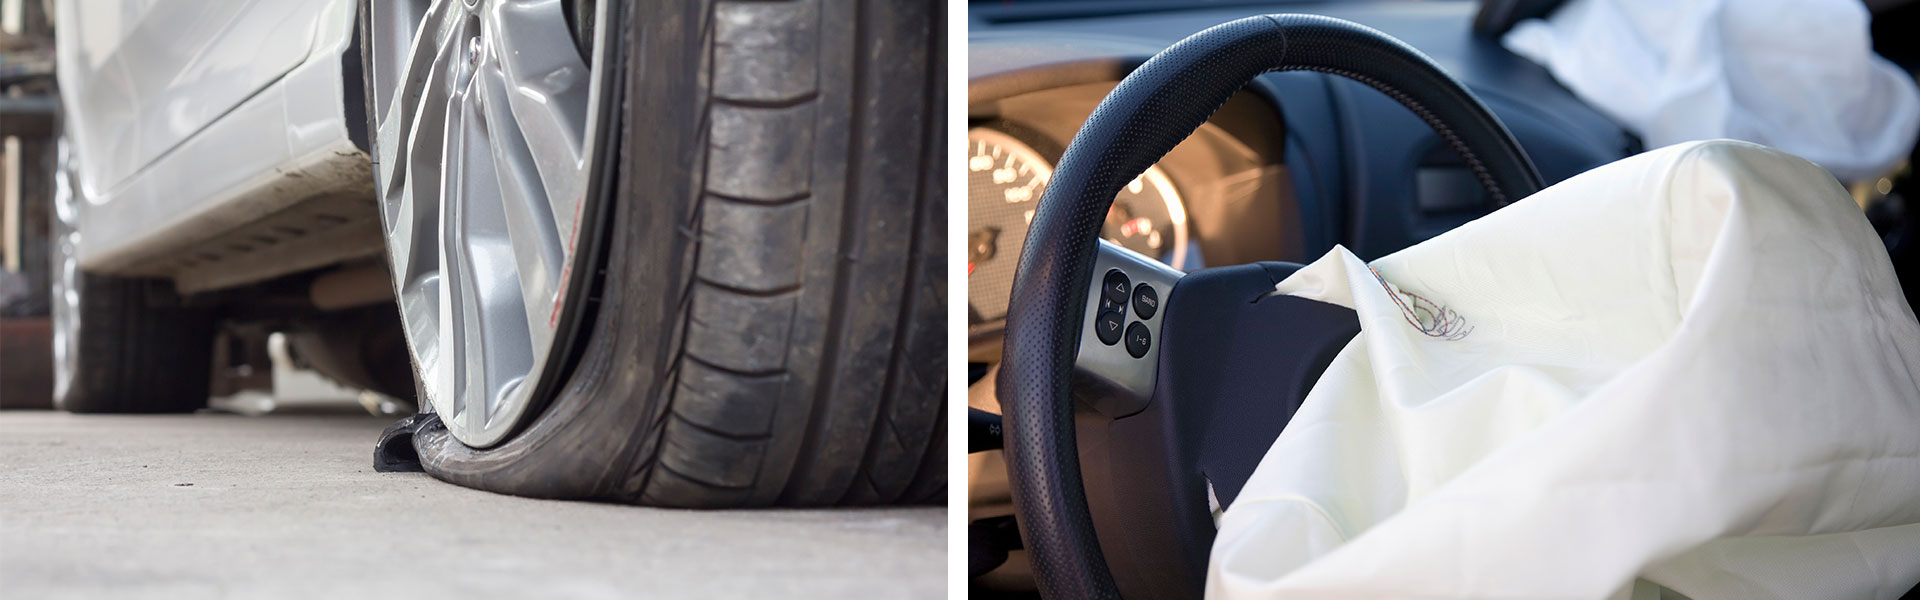 Pasadena Texas airbag, seatbelt and tire accidents